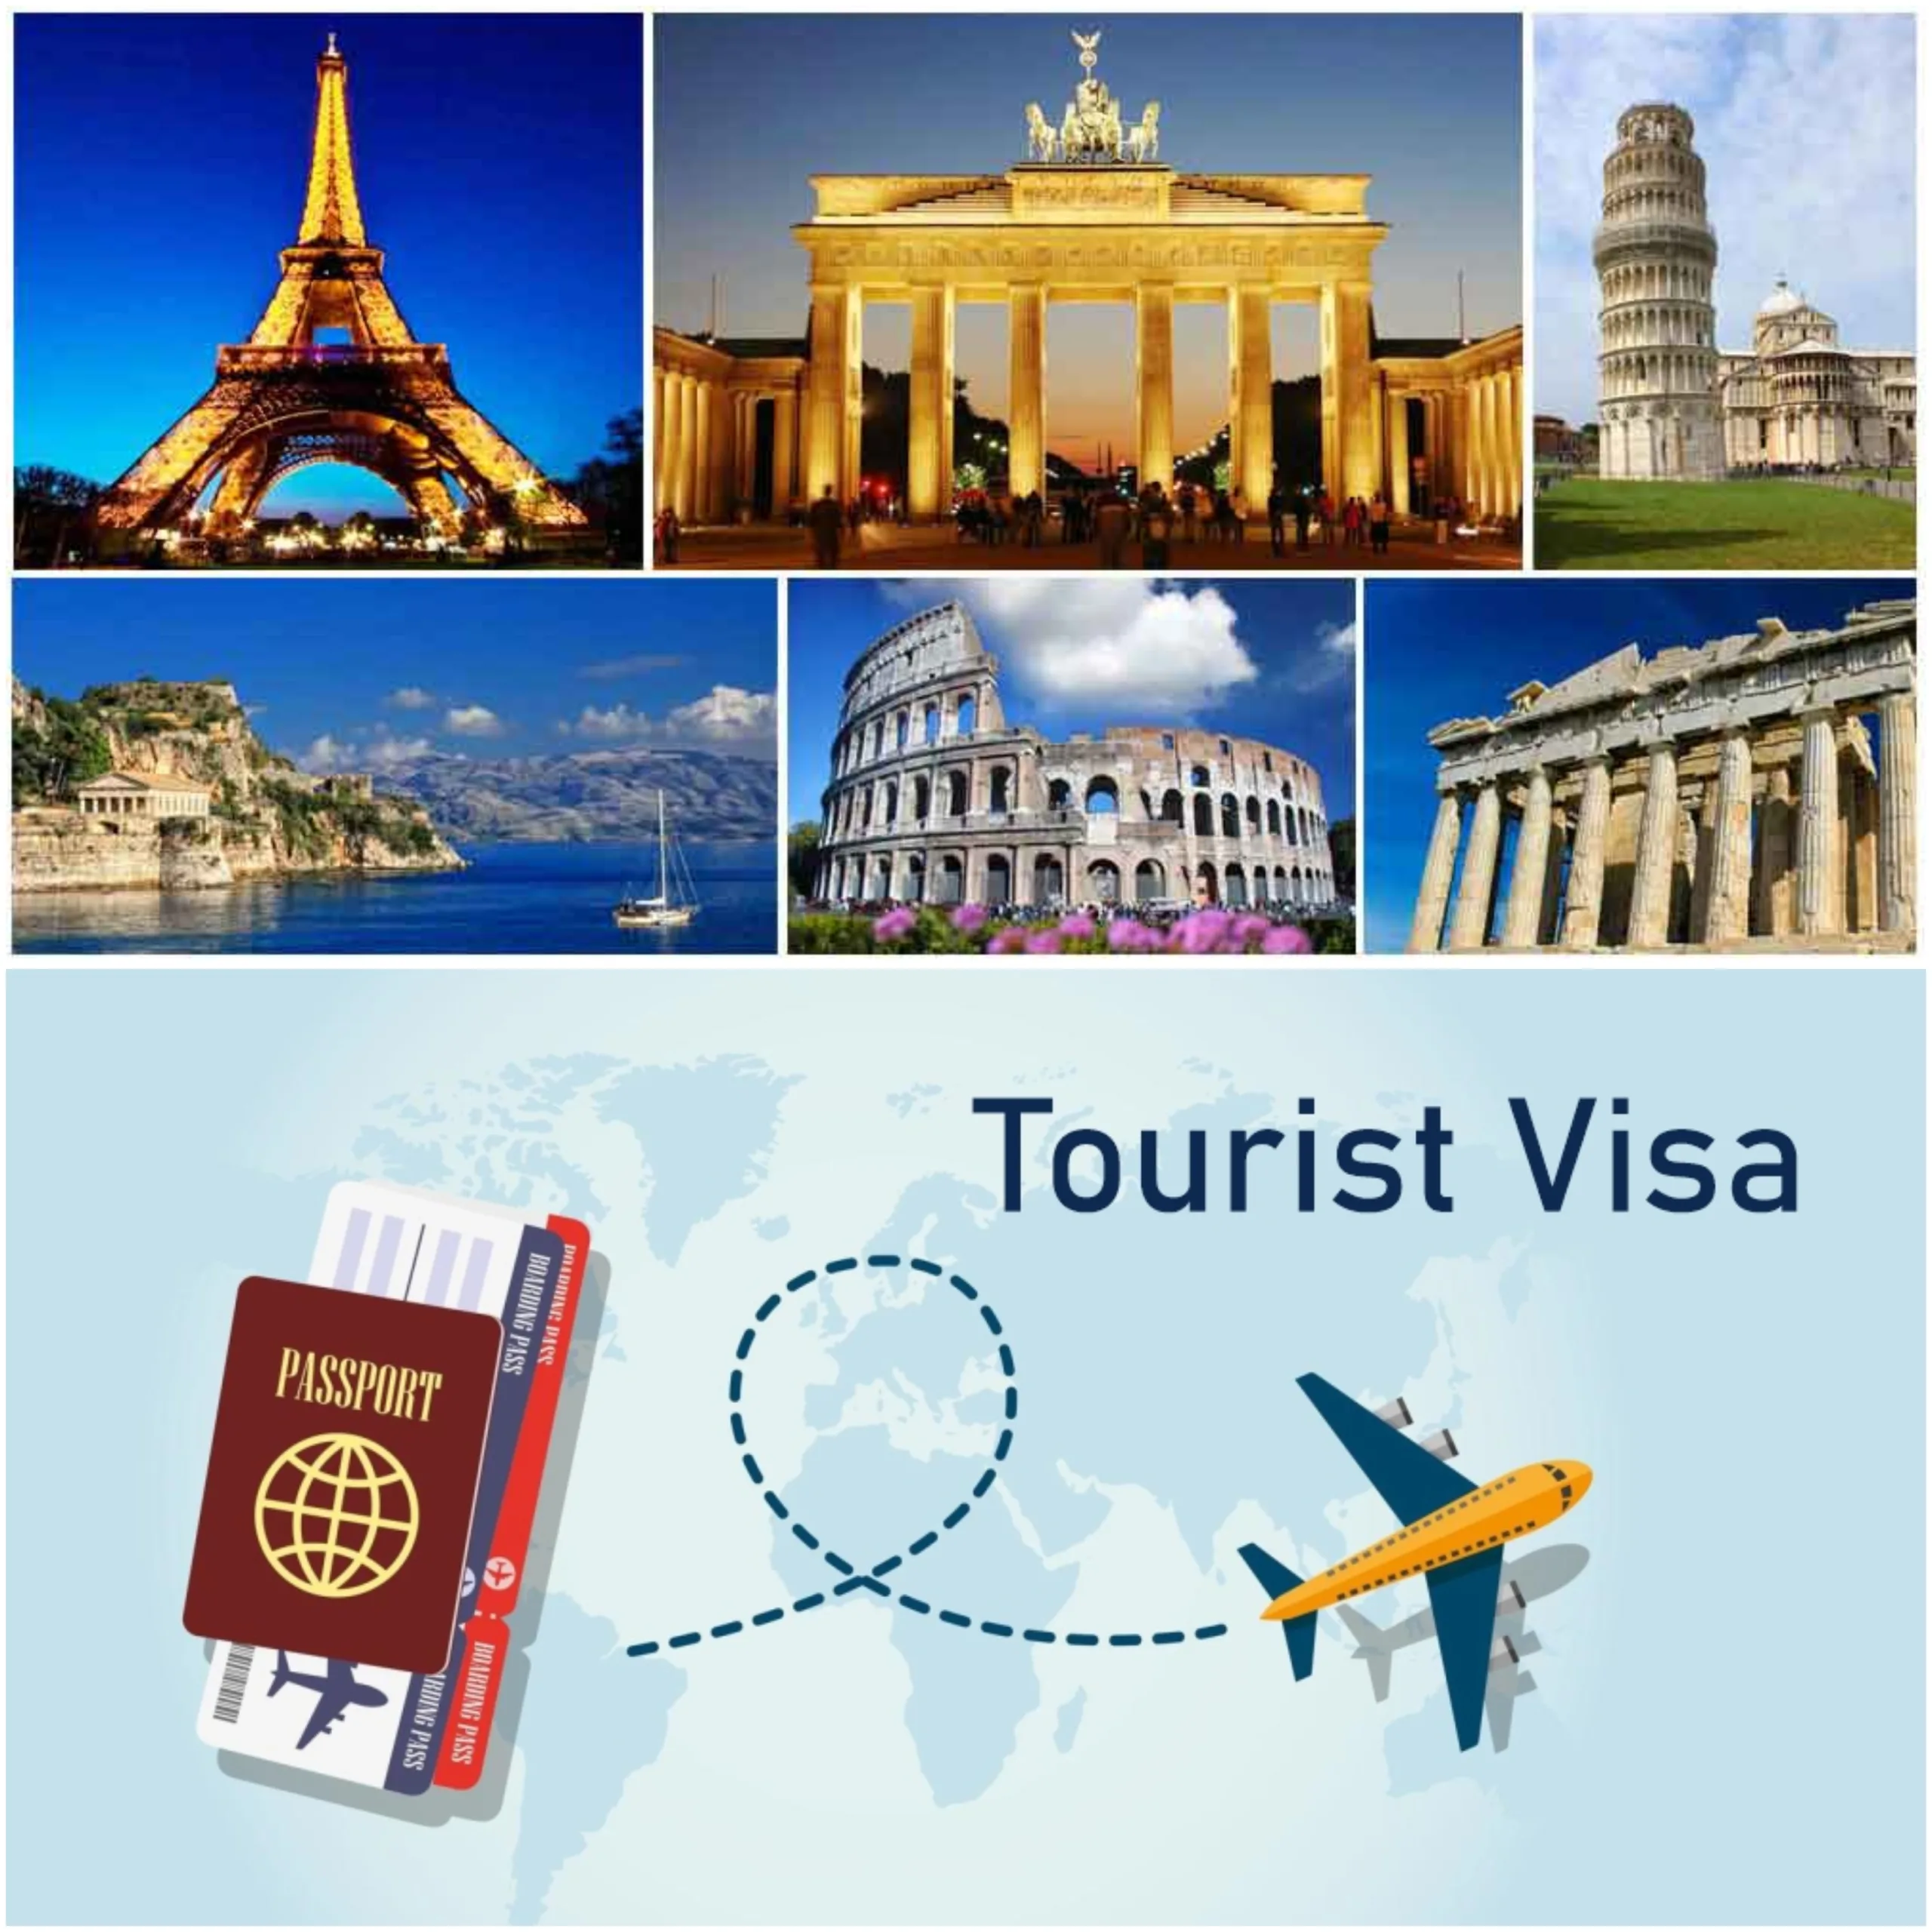 Which Tourist Visa is Best for Europe?